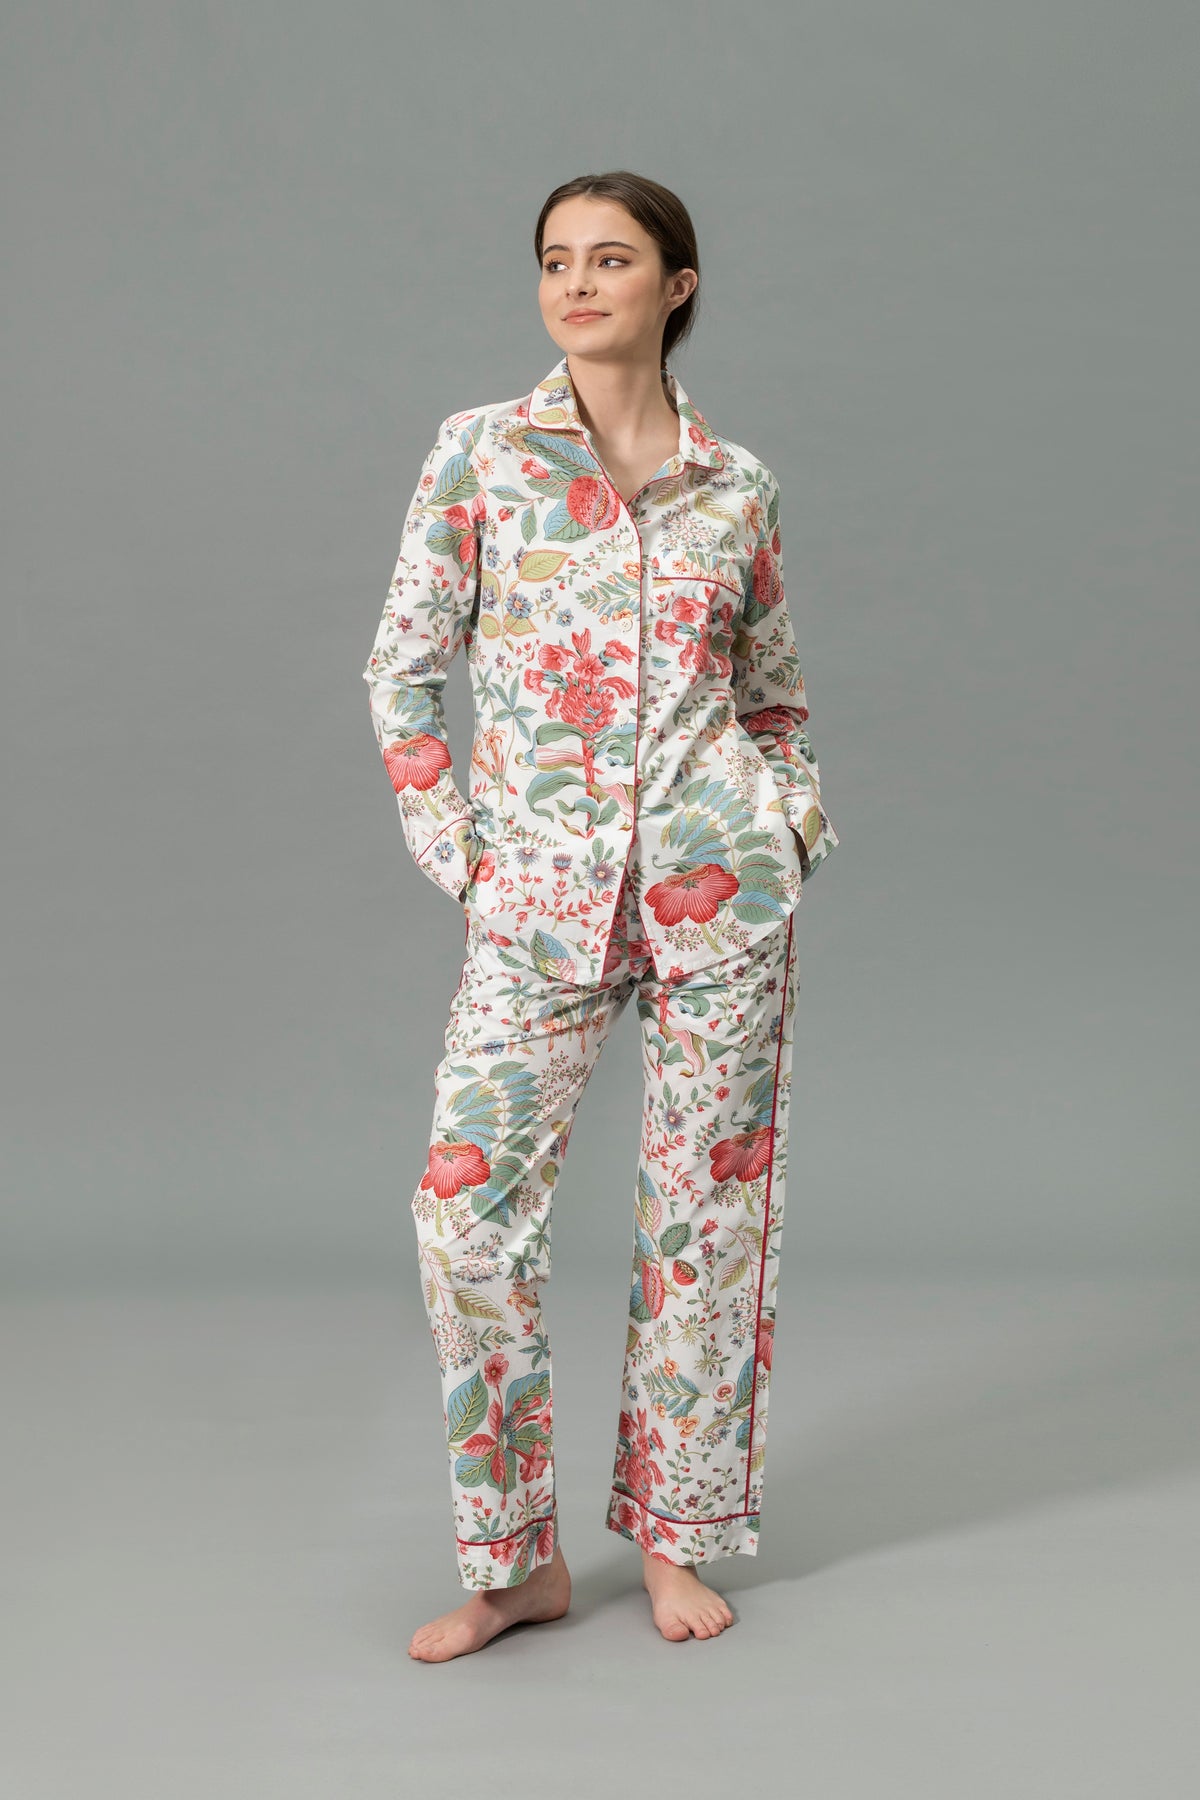 Front View of Model Wearing Matouk Luca Pajama Set in Color Levi Pomegranate Pink Coral